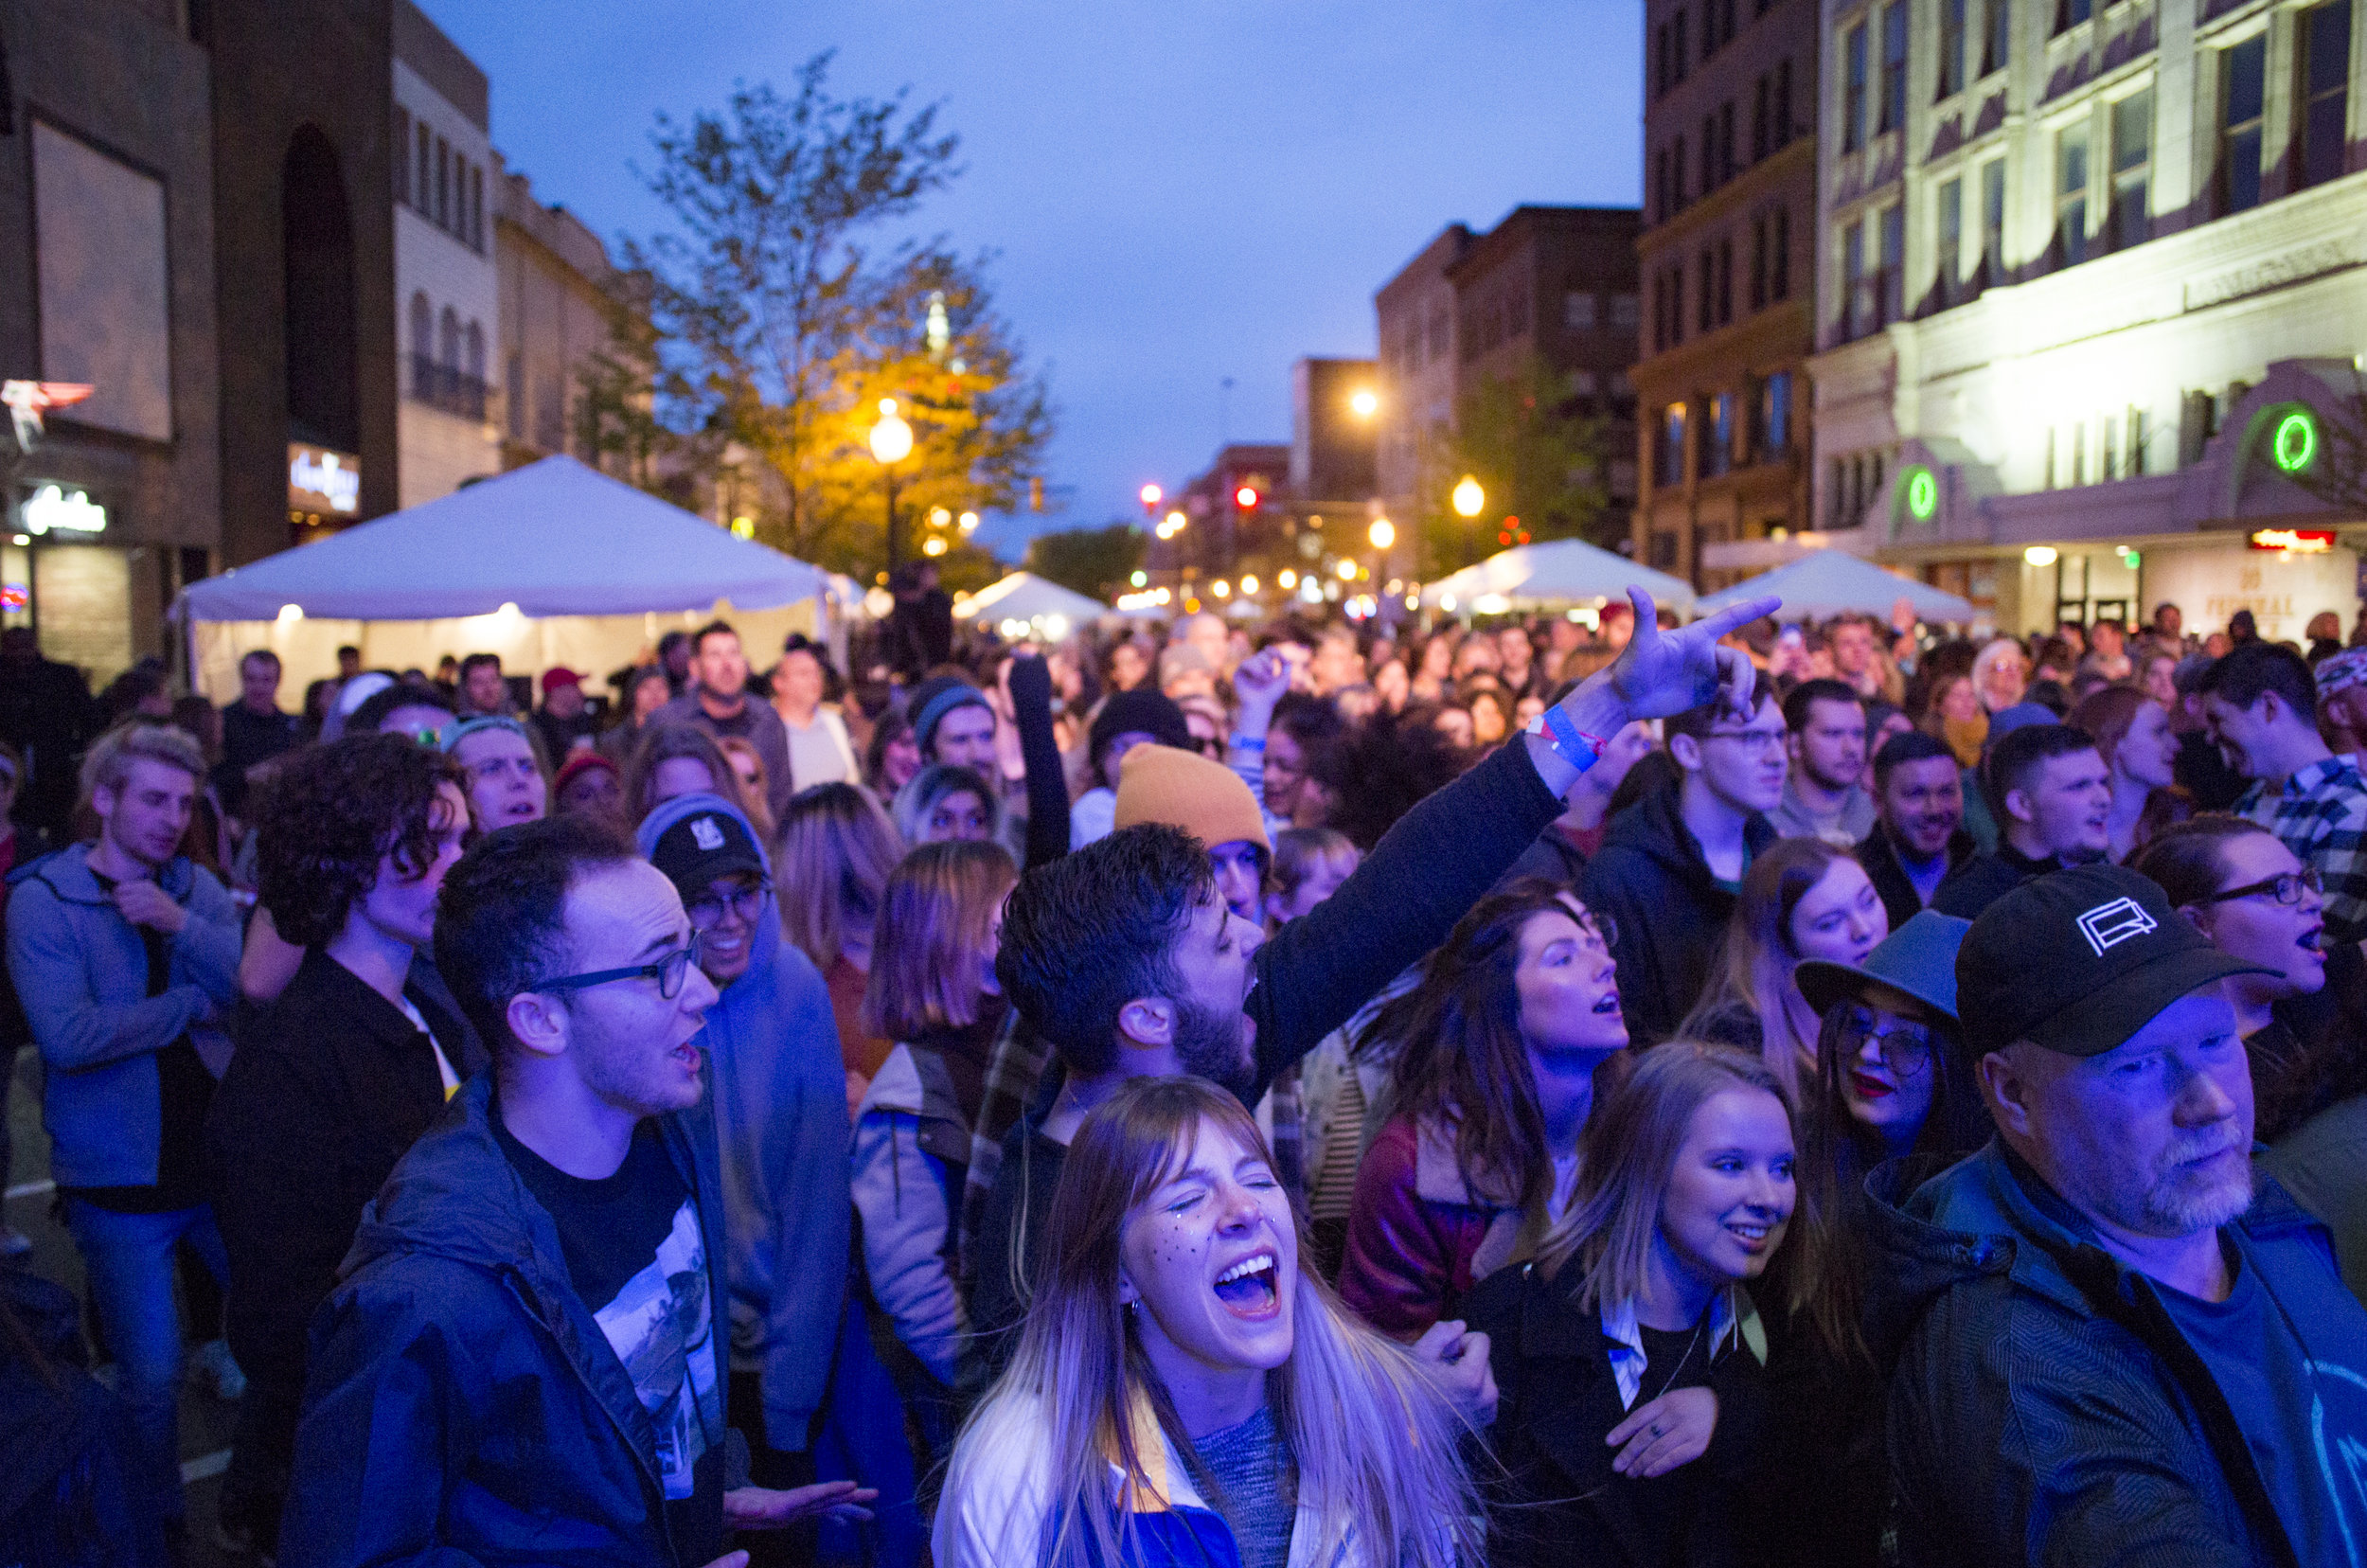  Alison Green, front center, of Boardman, Ohio, sings along as she and the crowd watch and listen to Spirit of the Bear perform at Federal Frenzy in downtown Youngstown, Ohio, on April 27, 2019. 